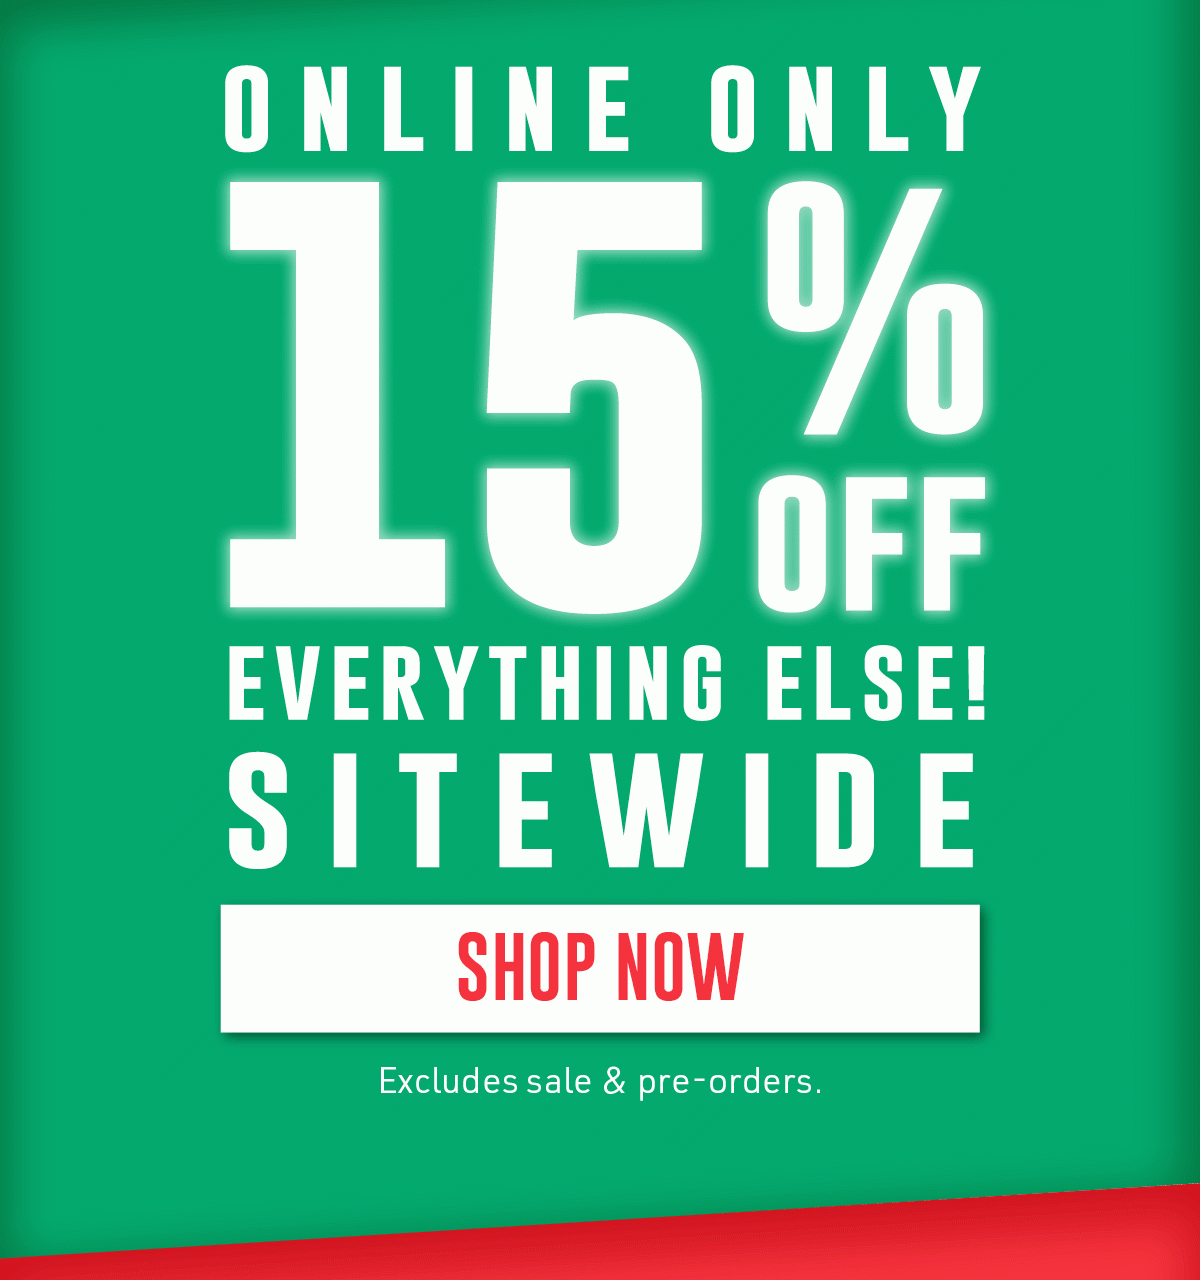 ONLINE ONLY 15% SITEWIDE*